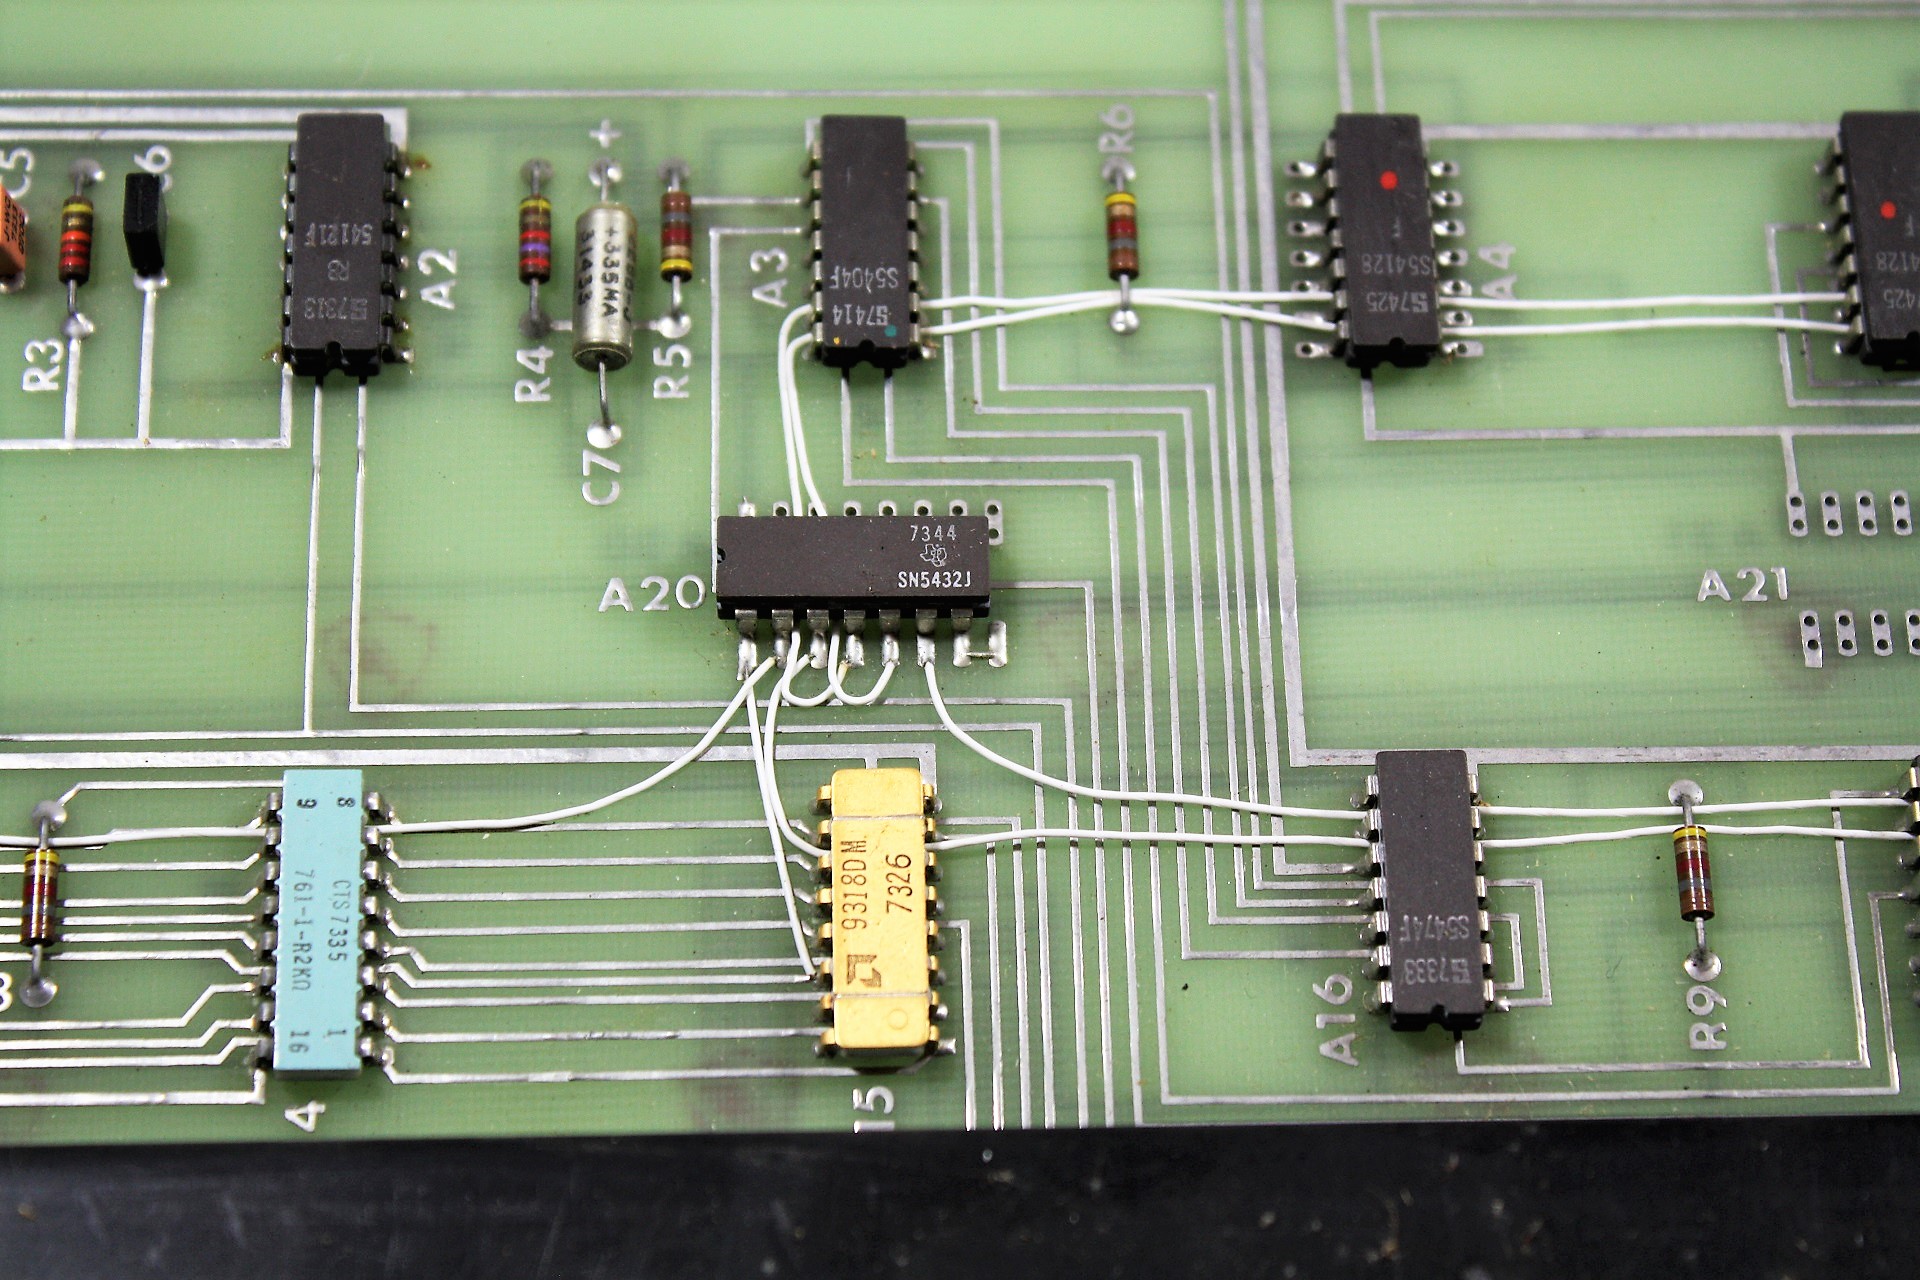 Bendix keyboard - components on keyboard PCB from 1973 - 1974